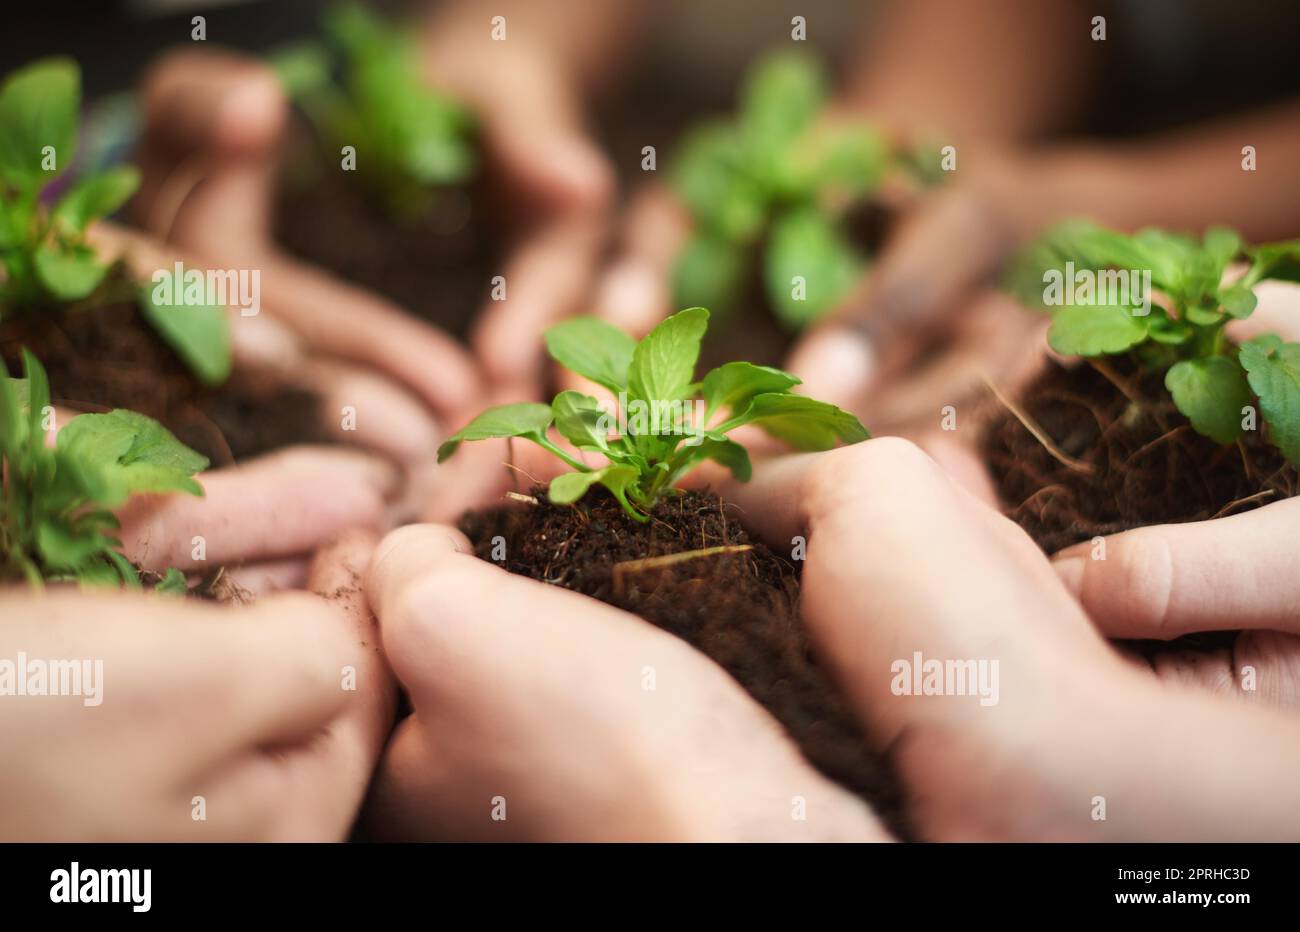 Precious resources. a group of people each holding a plant growing in soil together. Stock Photo